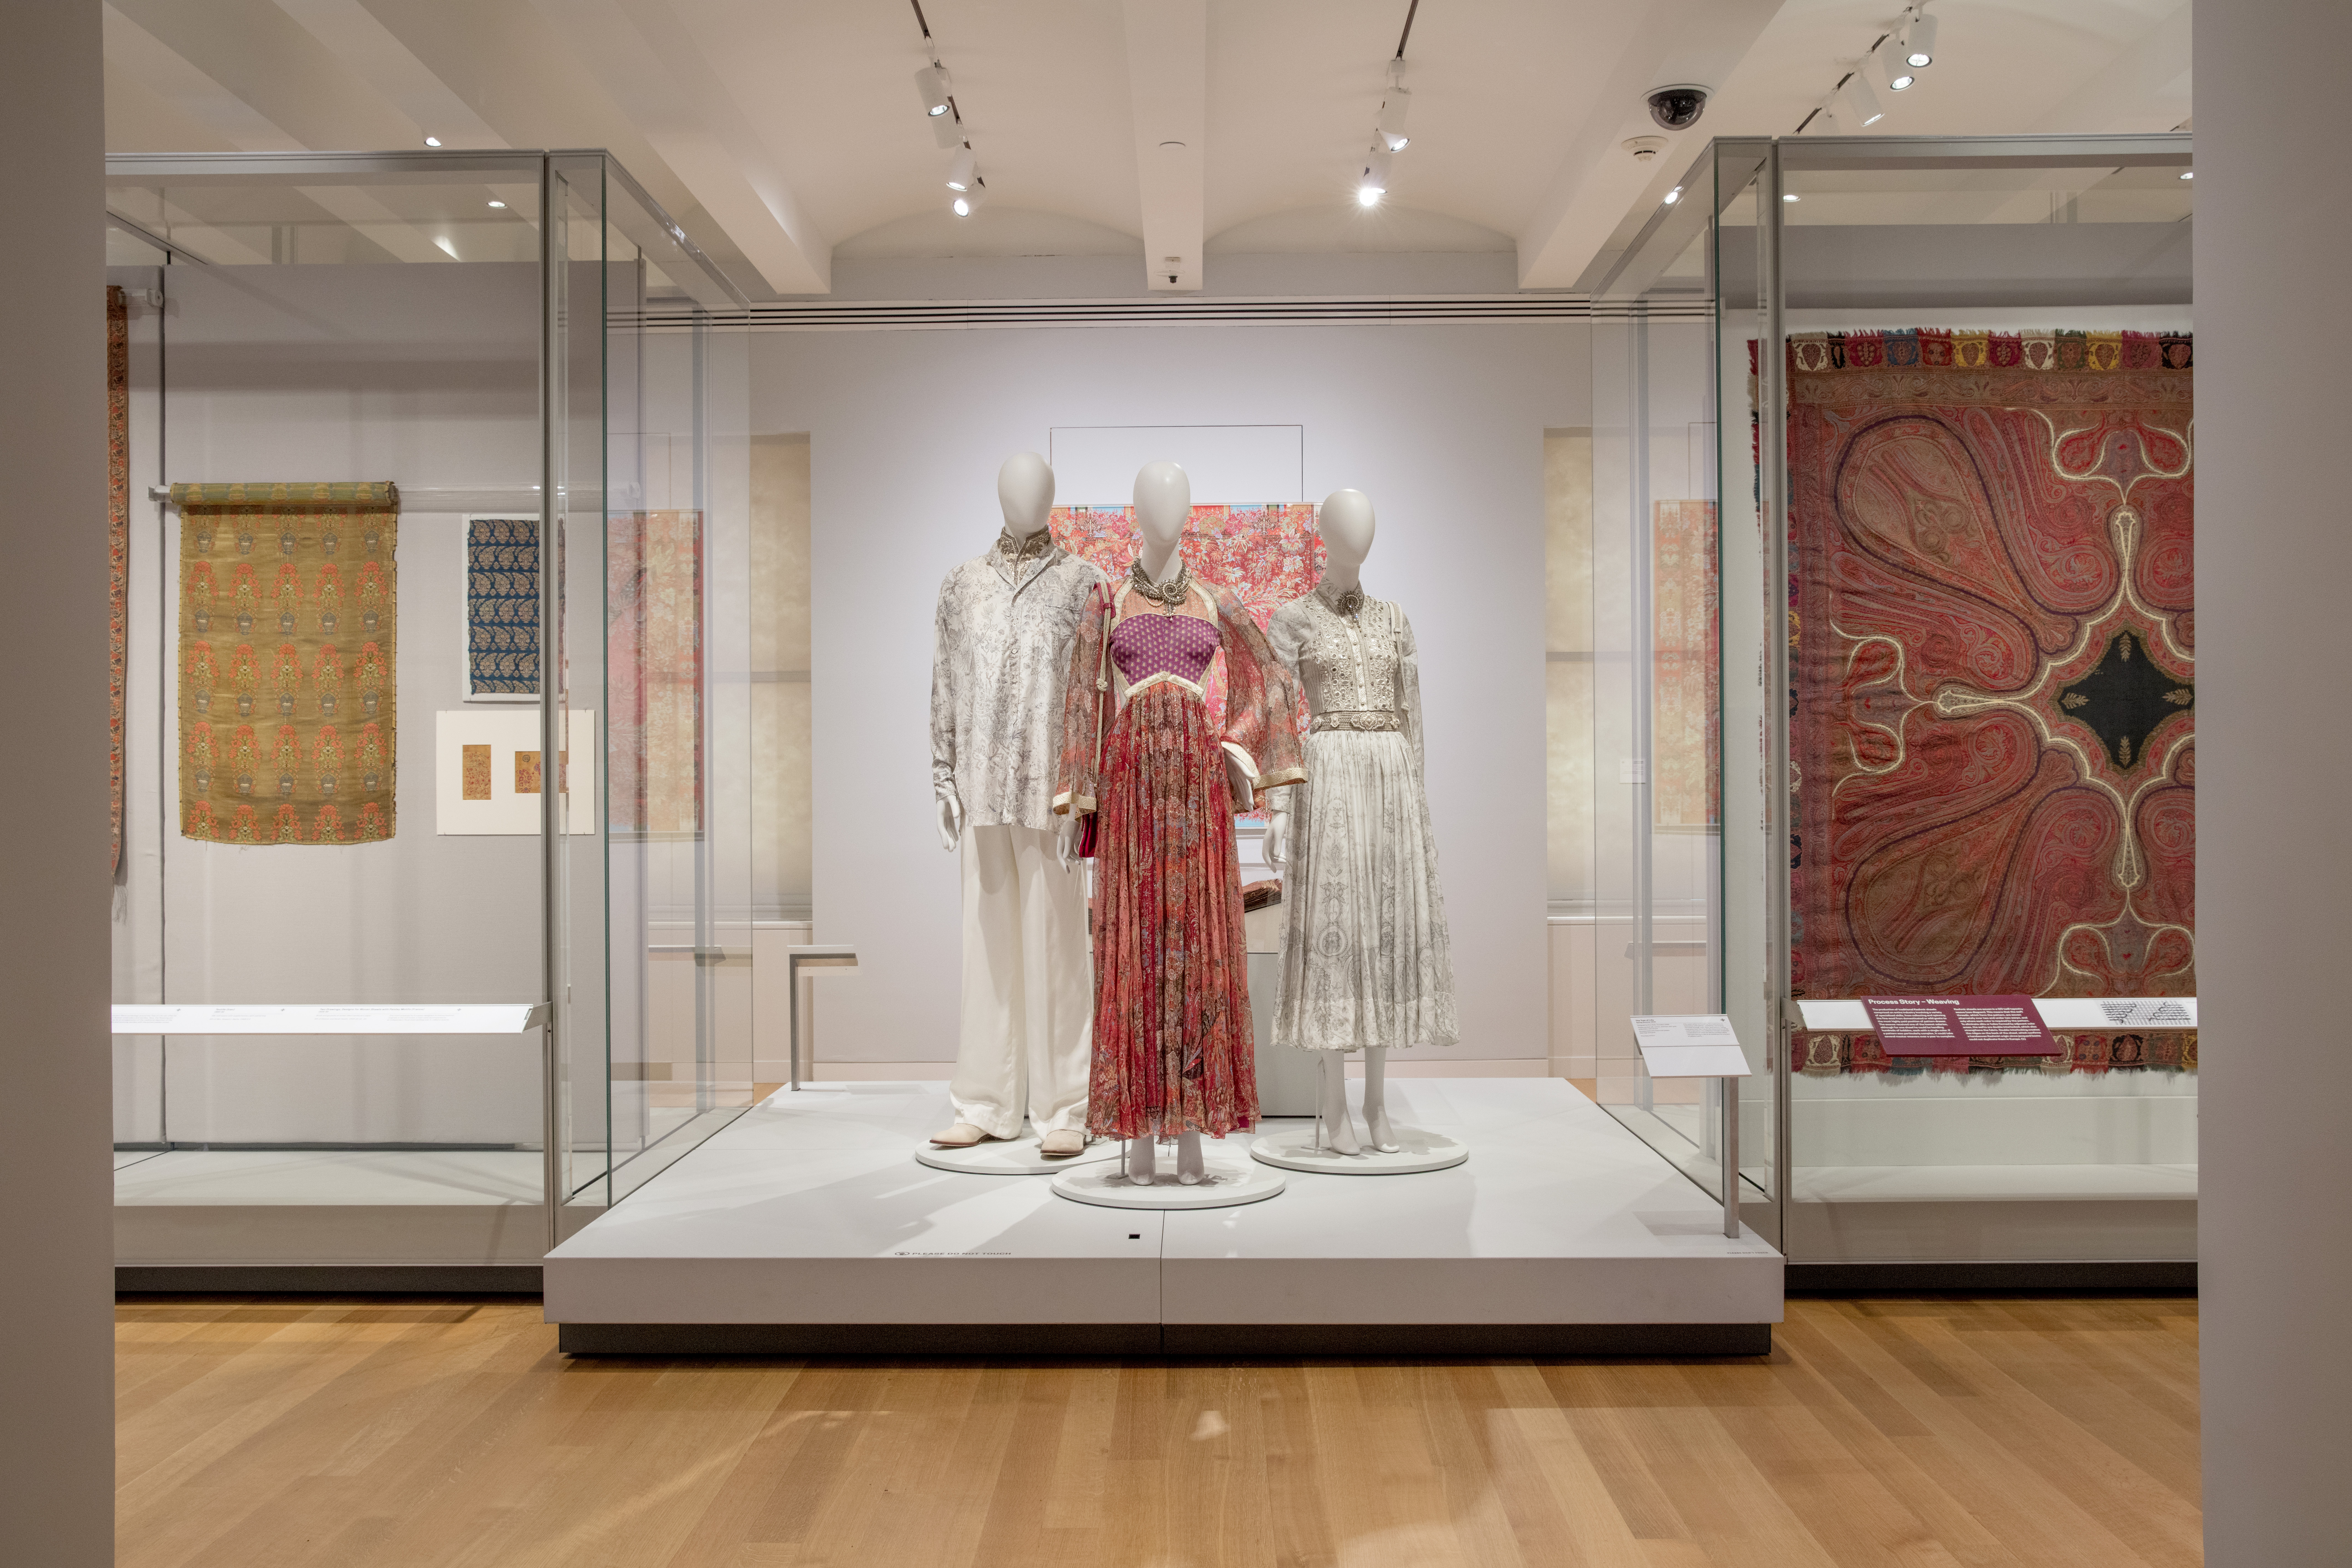 In the Cooper Hewitt galleries, three white mannequins are positioned on a platform. The mannequin the center wears a red gown. The mannequin on the left wears a white silk blouse and white silk pajama pants. The mannequin on the right wears a white gown. To the sides of the mannequins are cases, through which can be seen an enormous red flower fabric hanging.